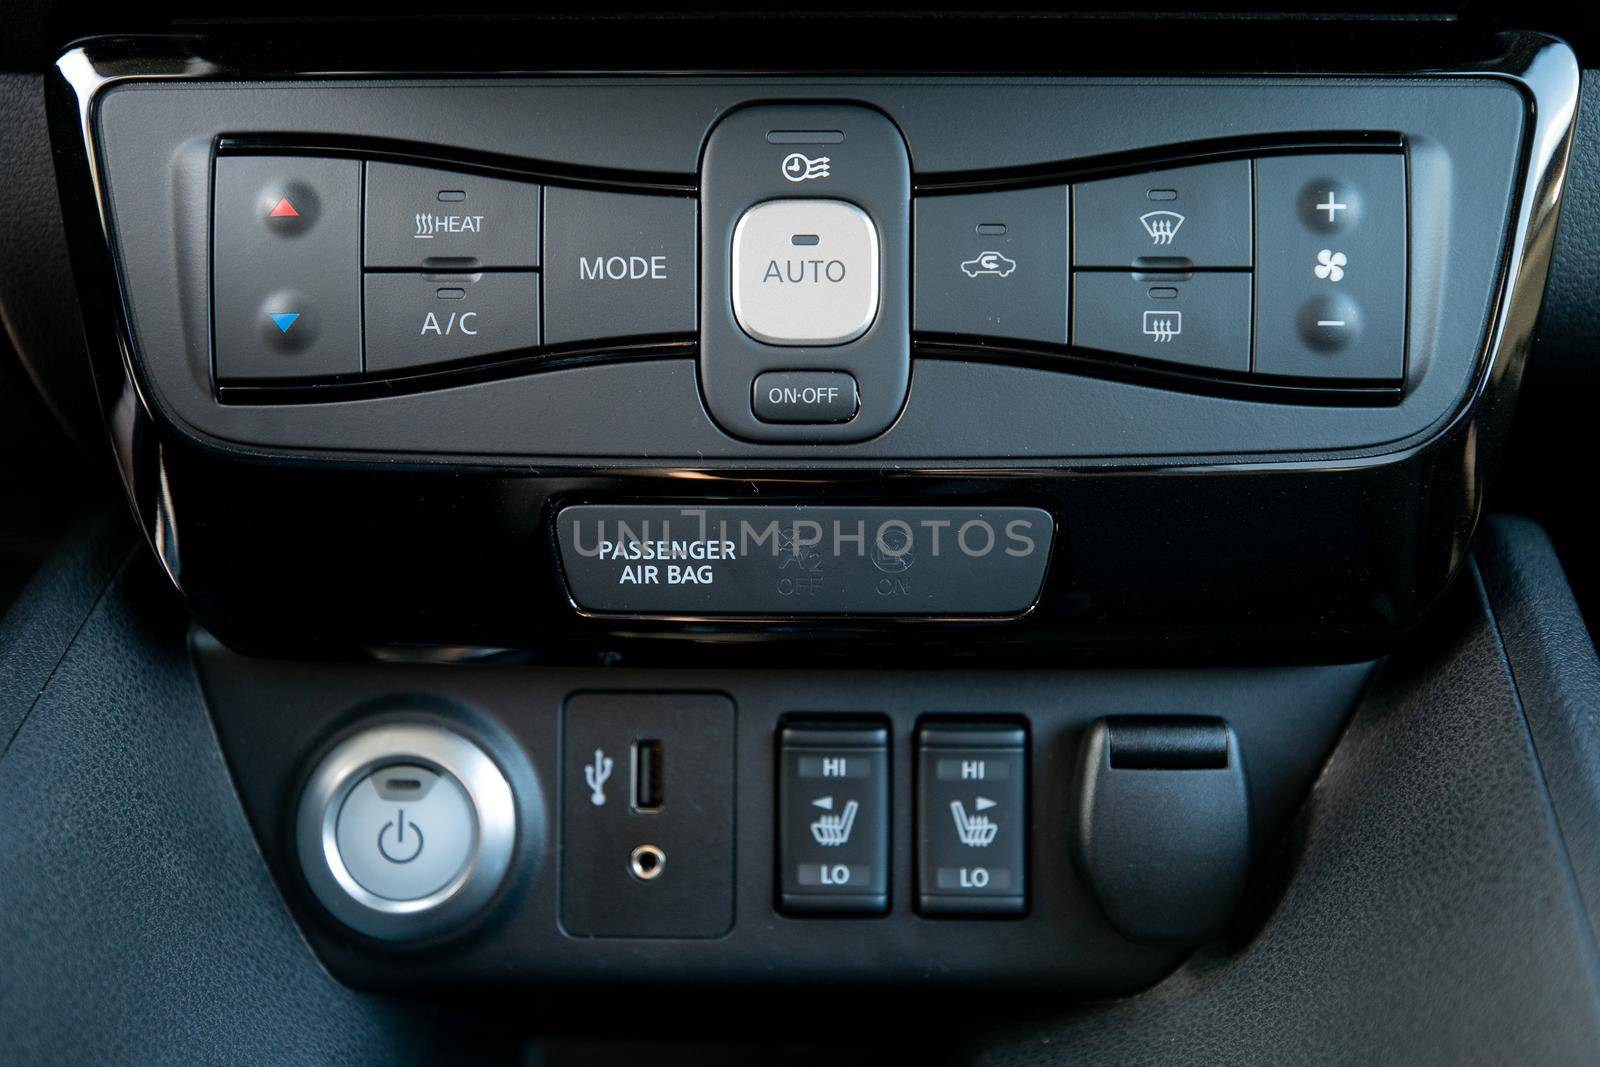 Conditioner and air flow control in a modern car. Car interior with climate-control view.